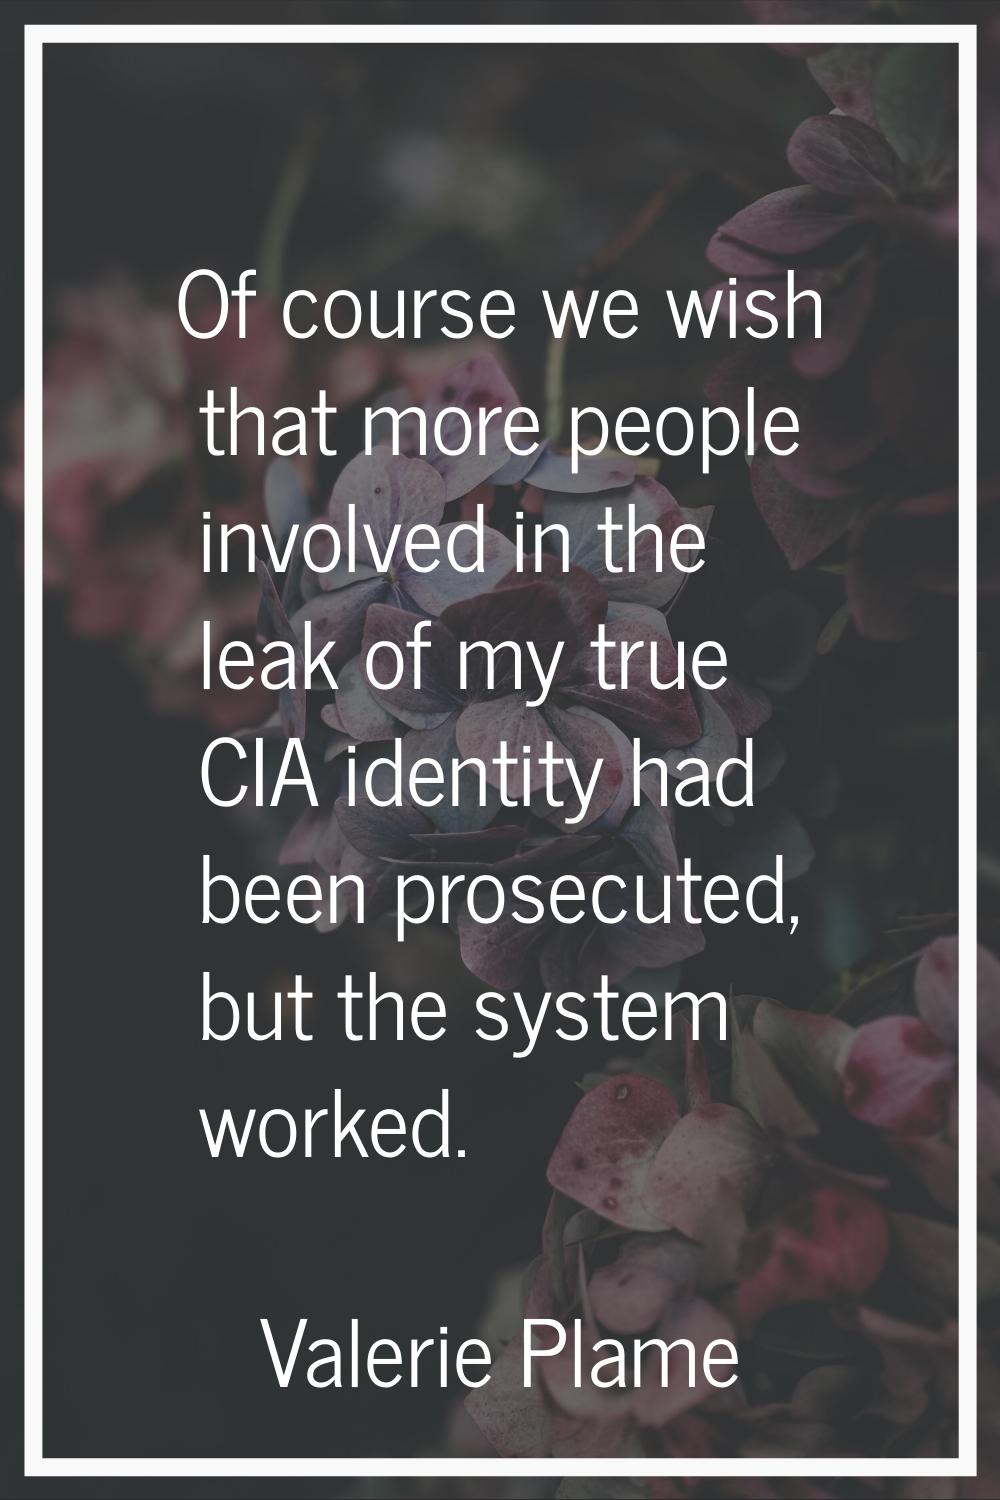 Of course we wish that more people involved in the leak of my true CIA identity had been prosecuted